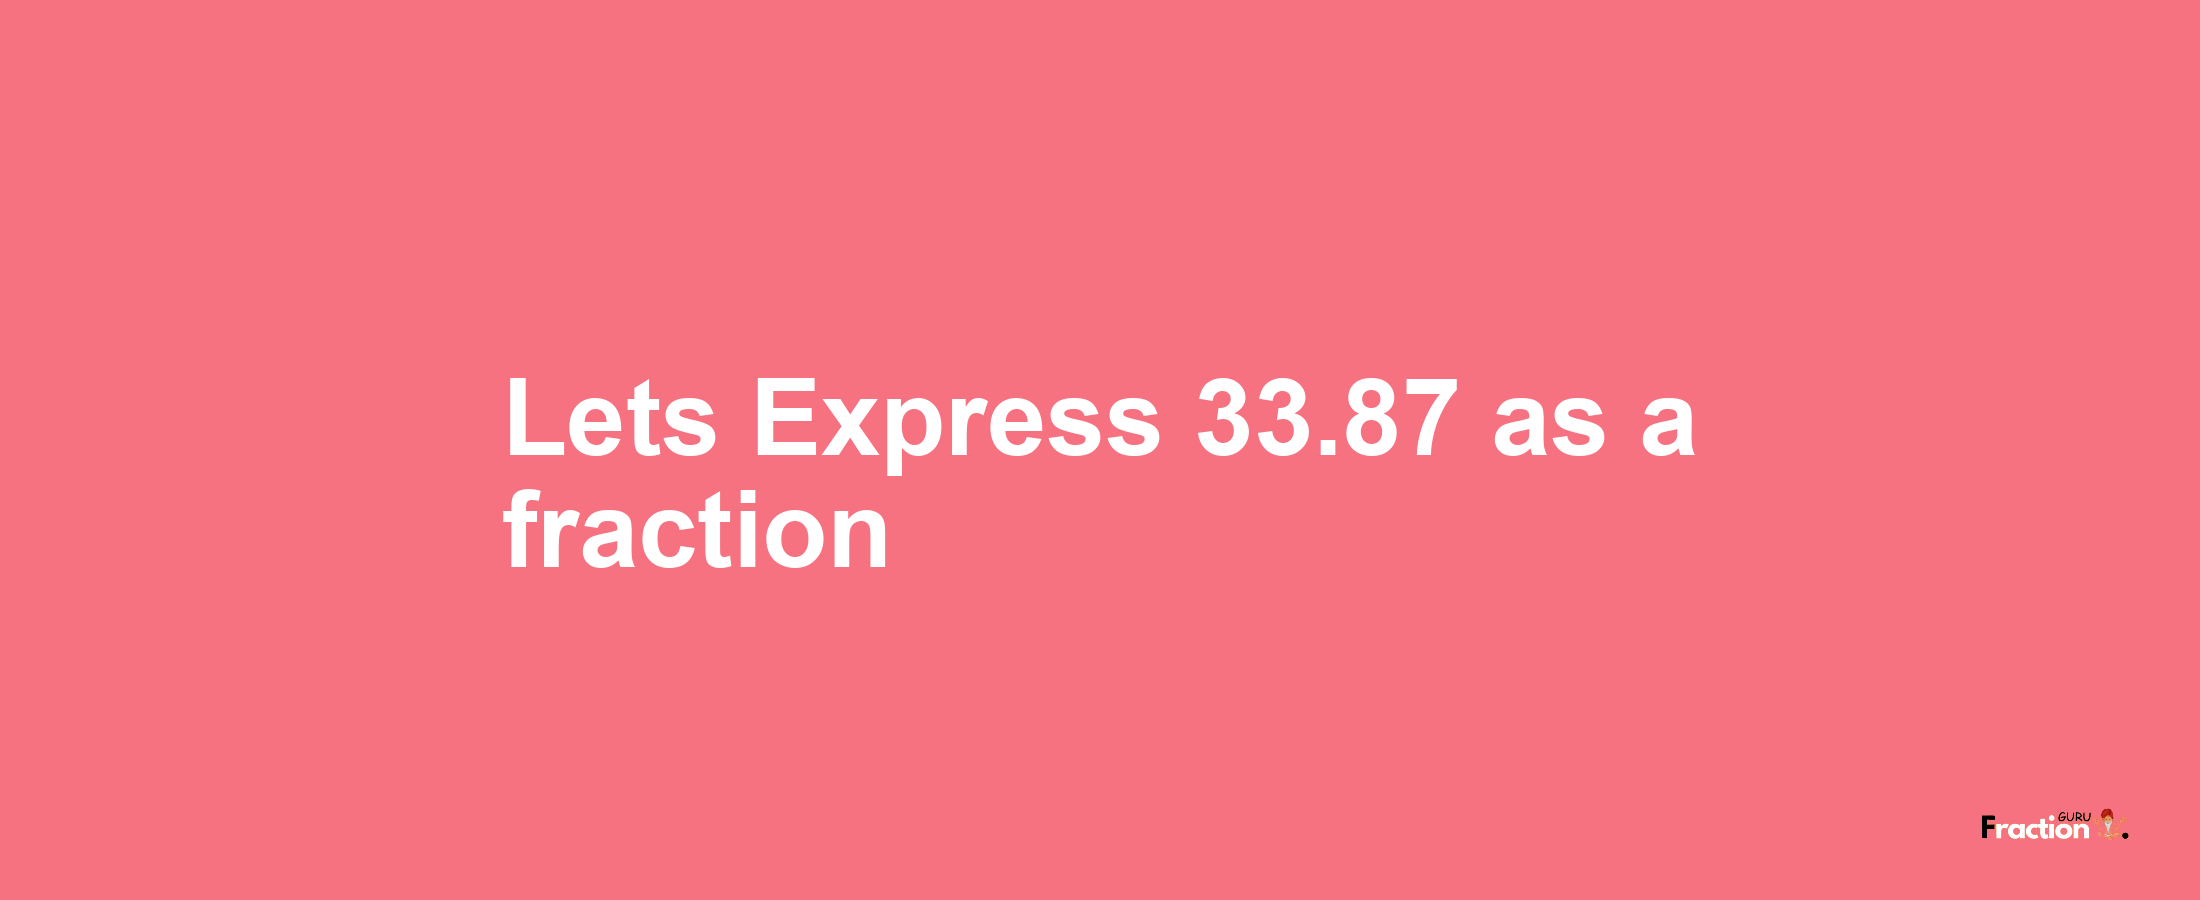 Lets Express 33.87 as afraction